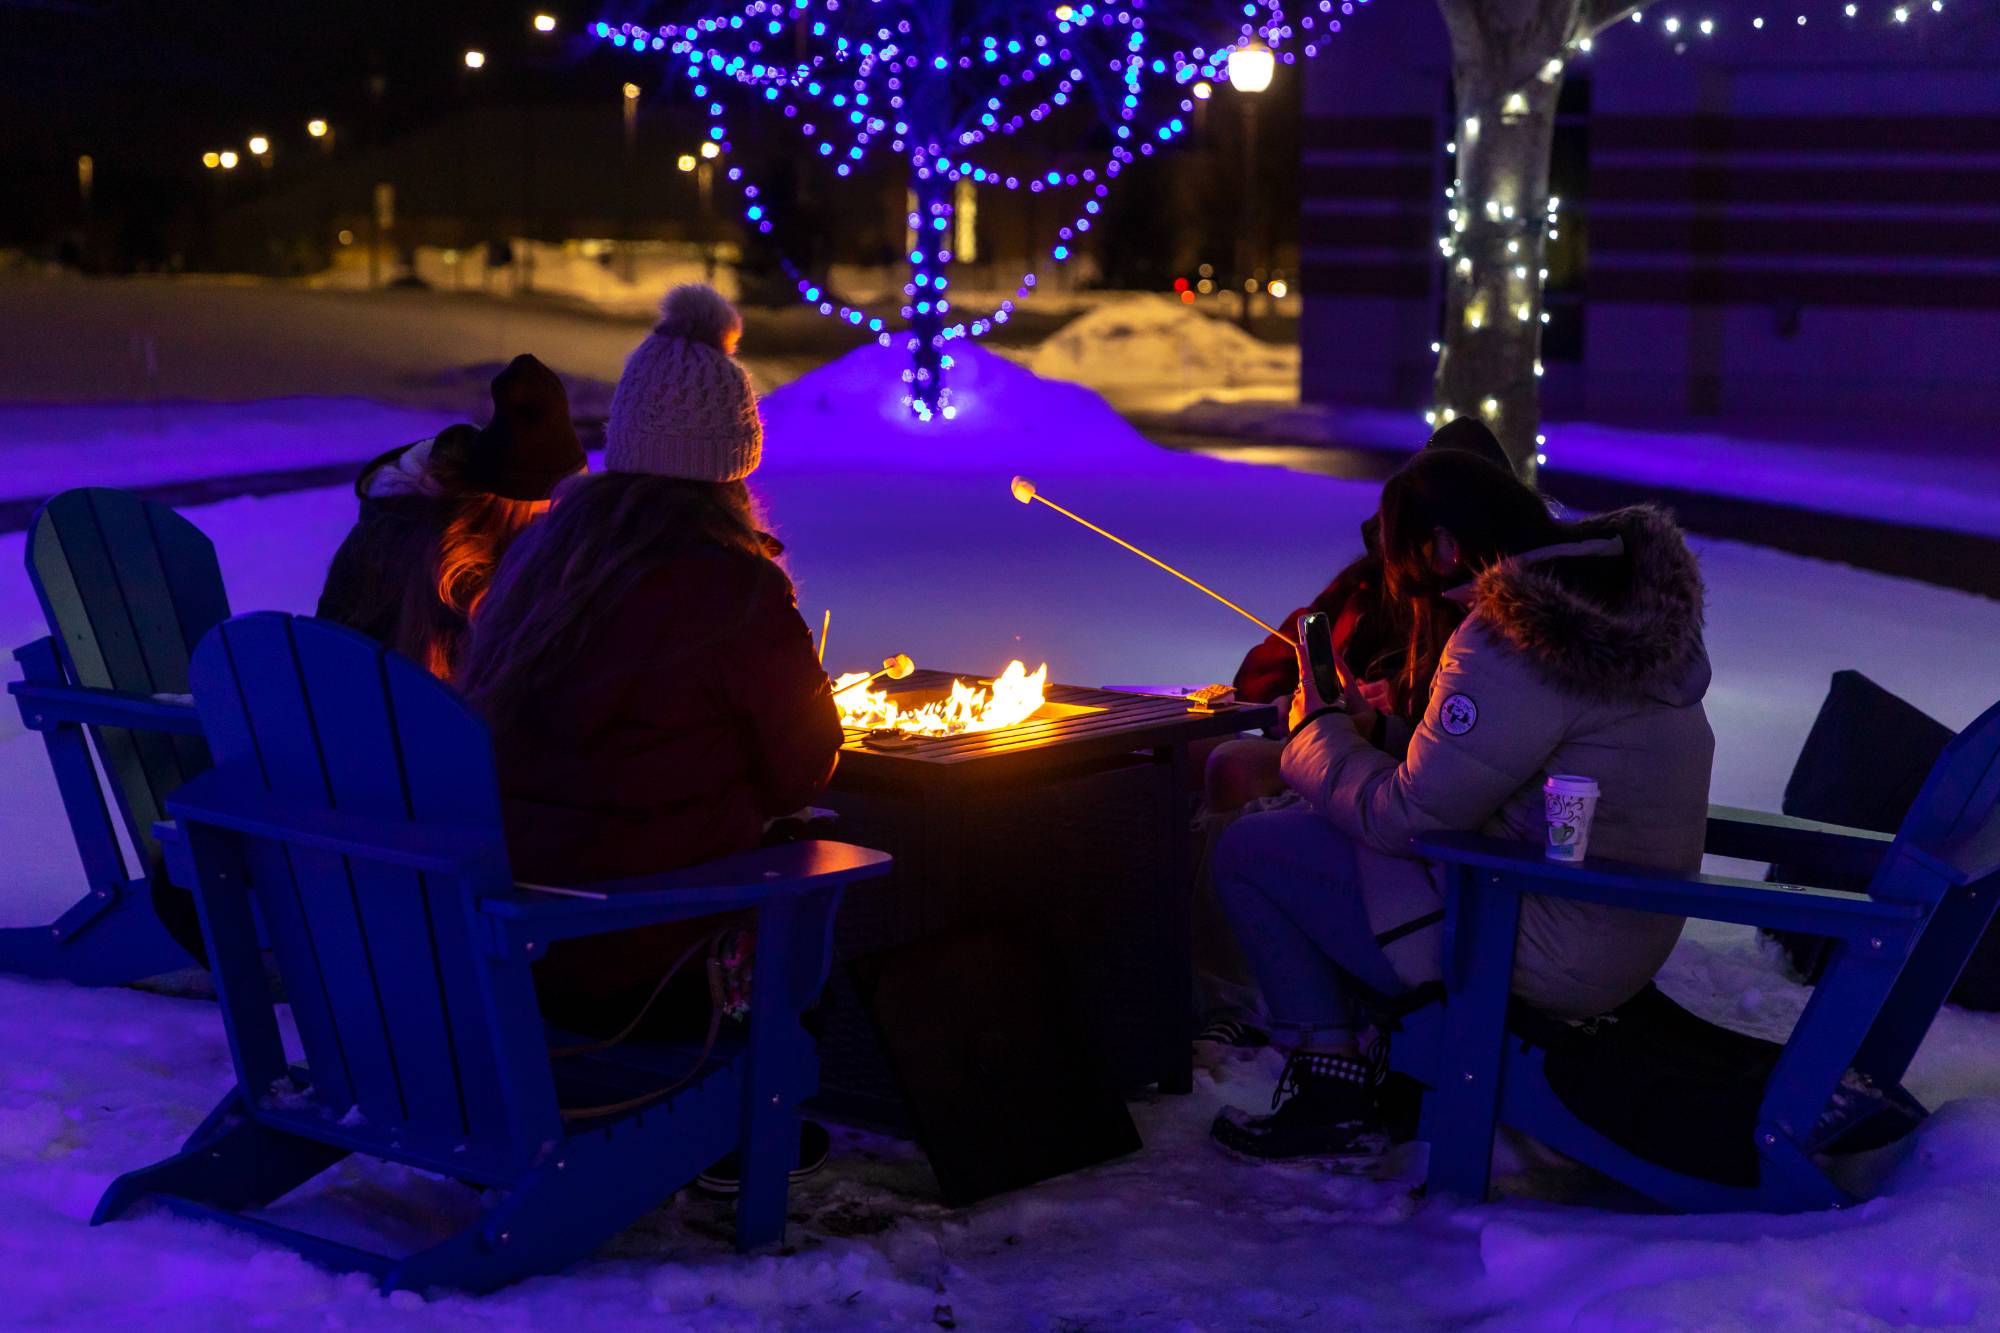 GVSU students roasting marshmallows around a fire together in the winter